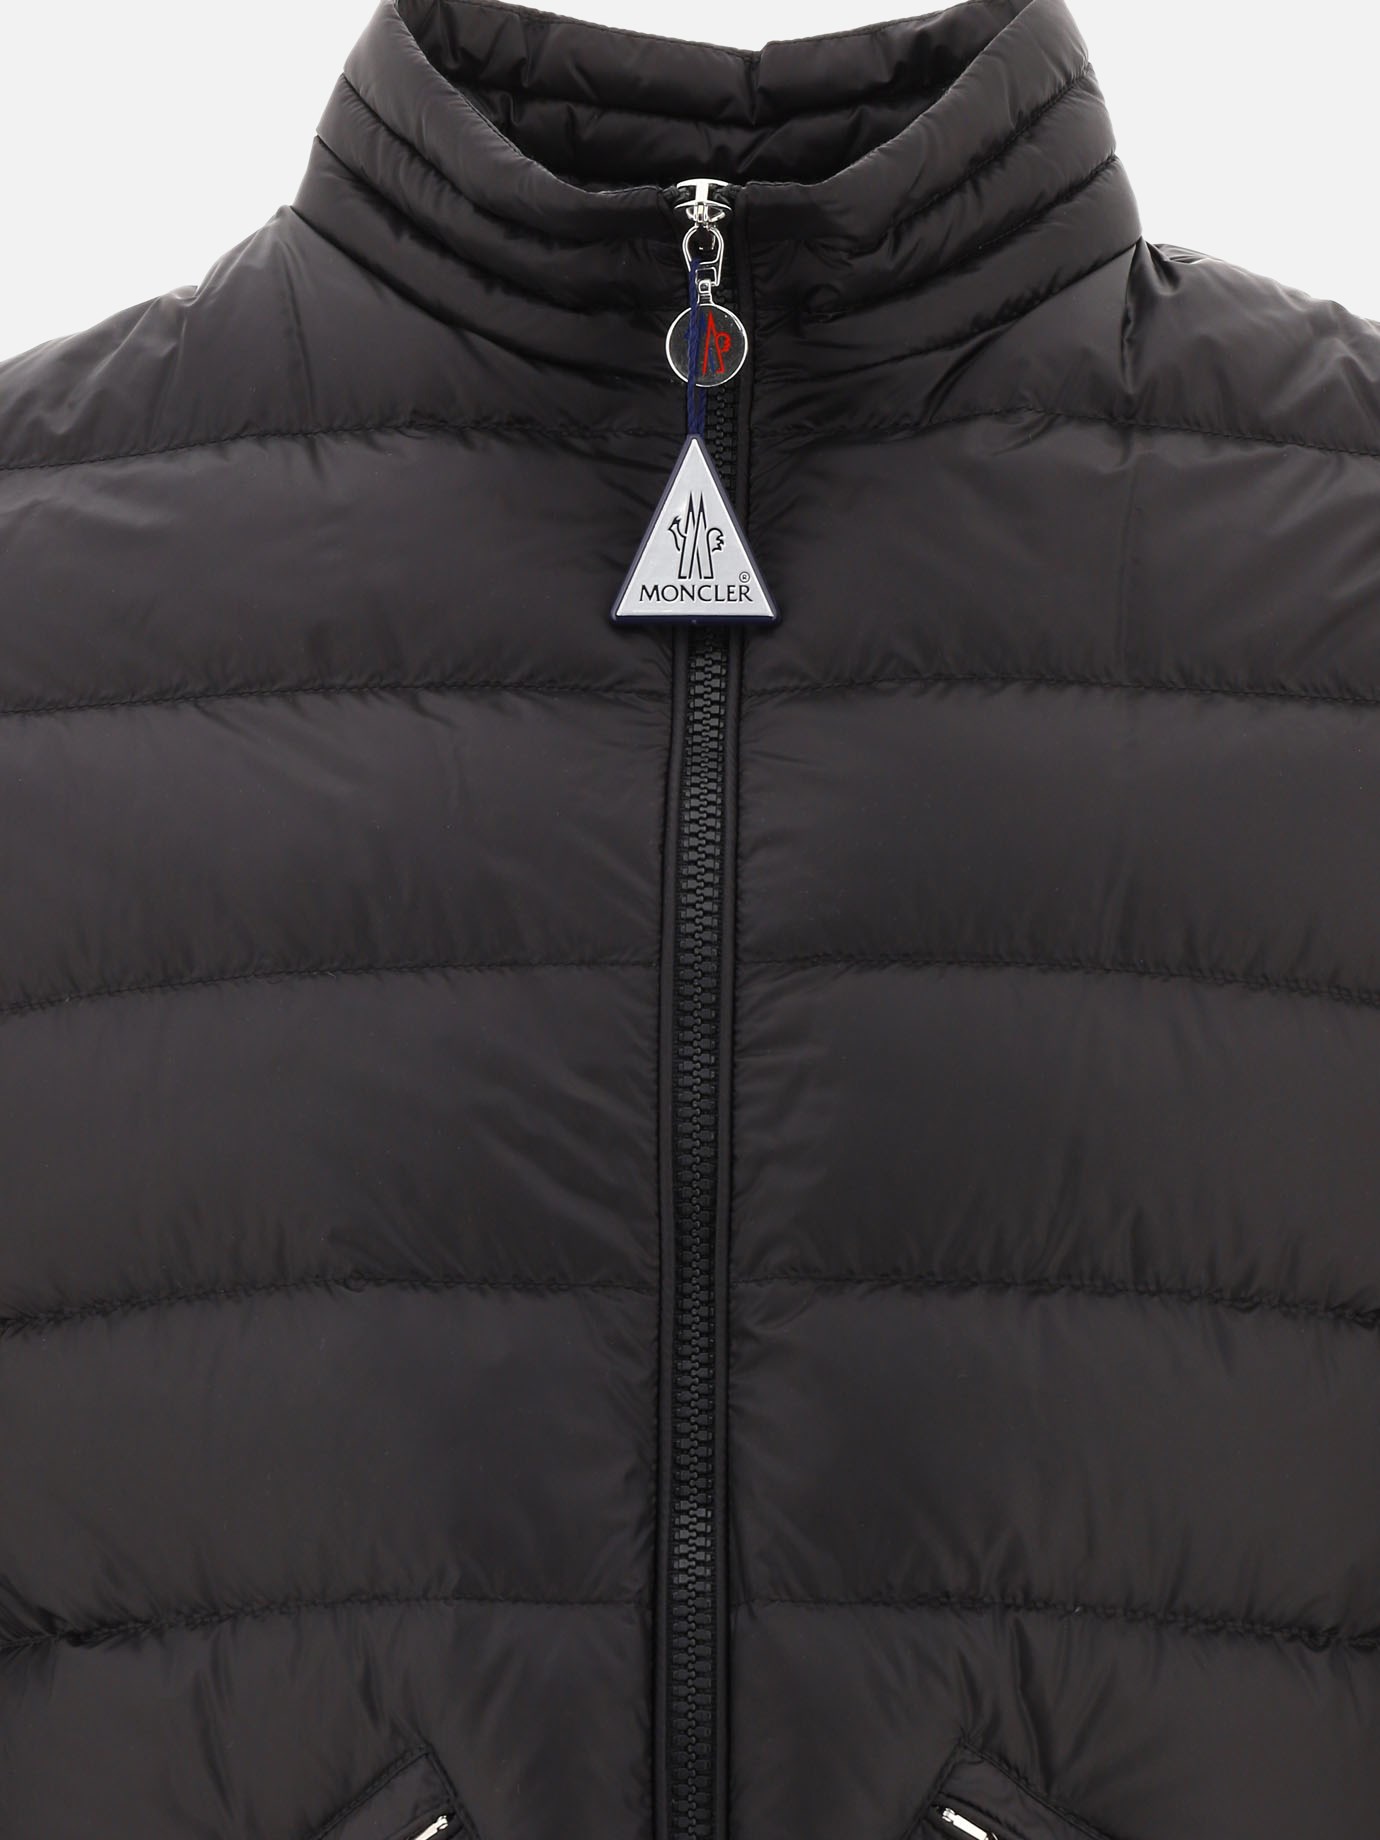  Agay  down jacket by Moncler